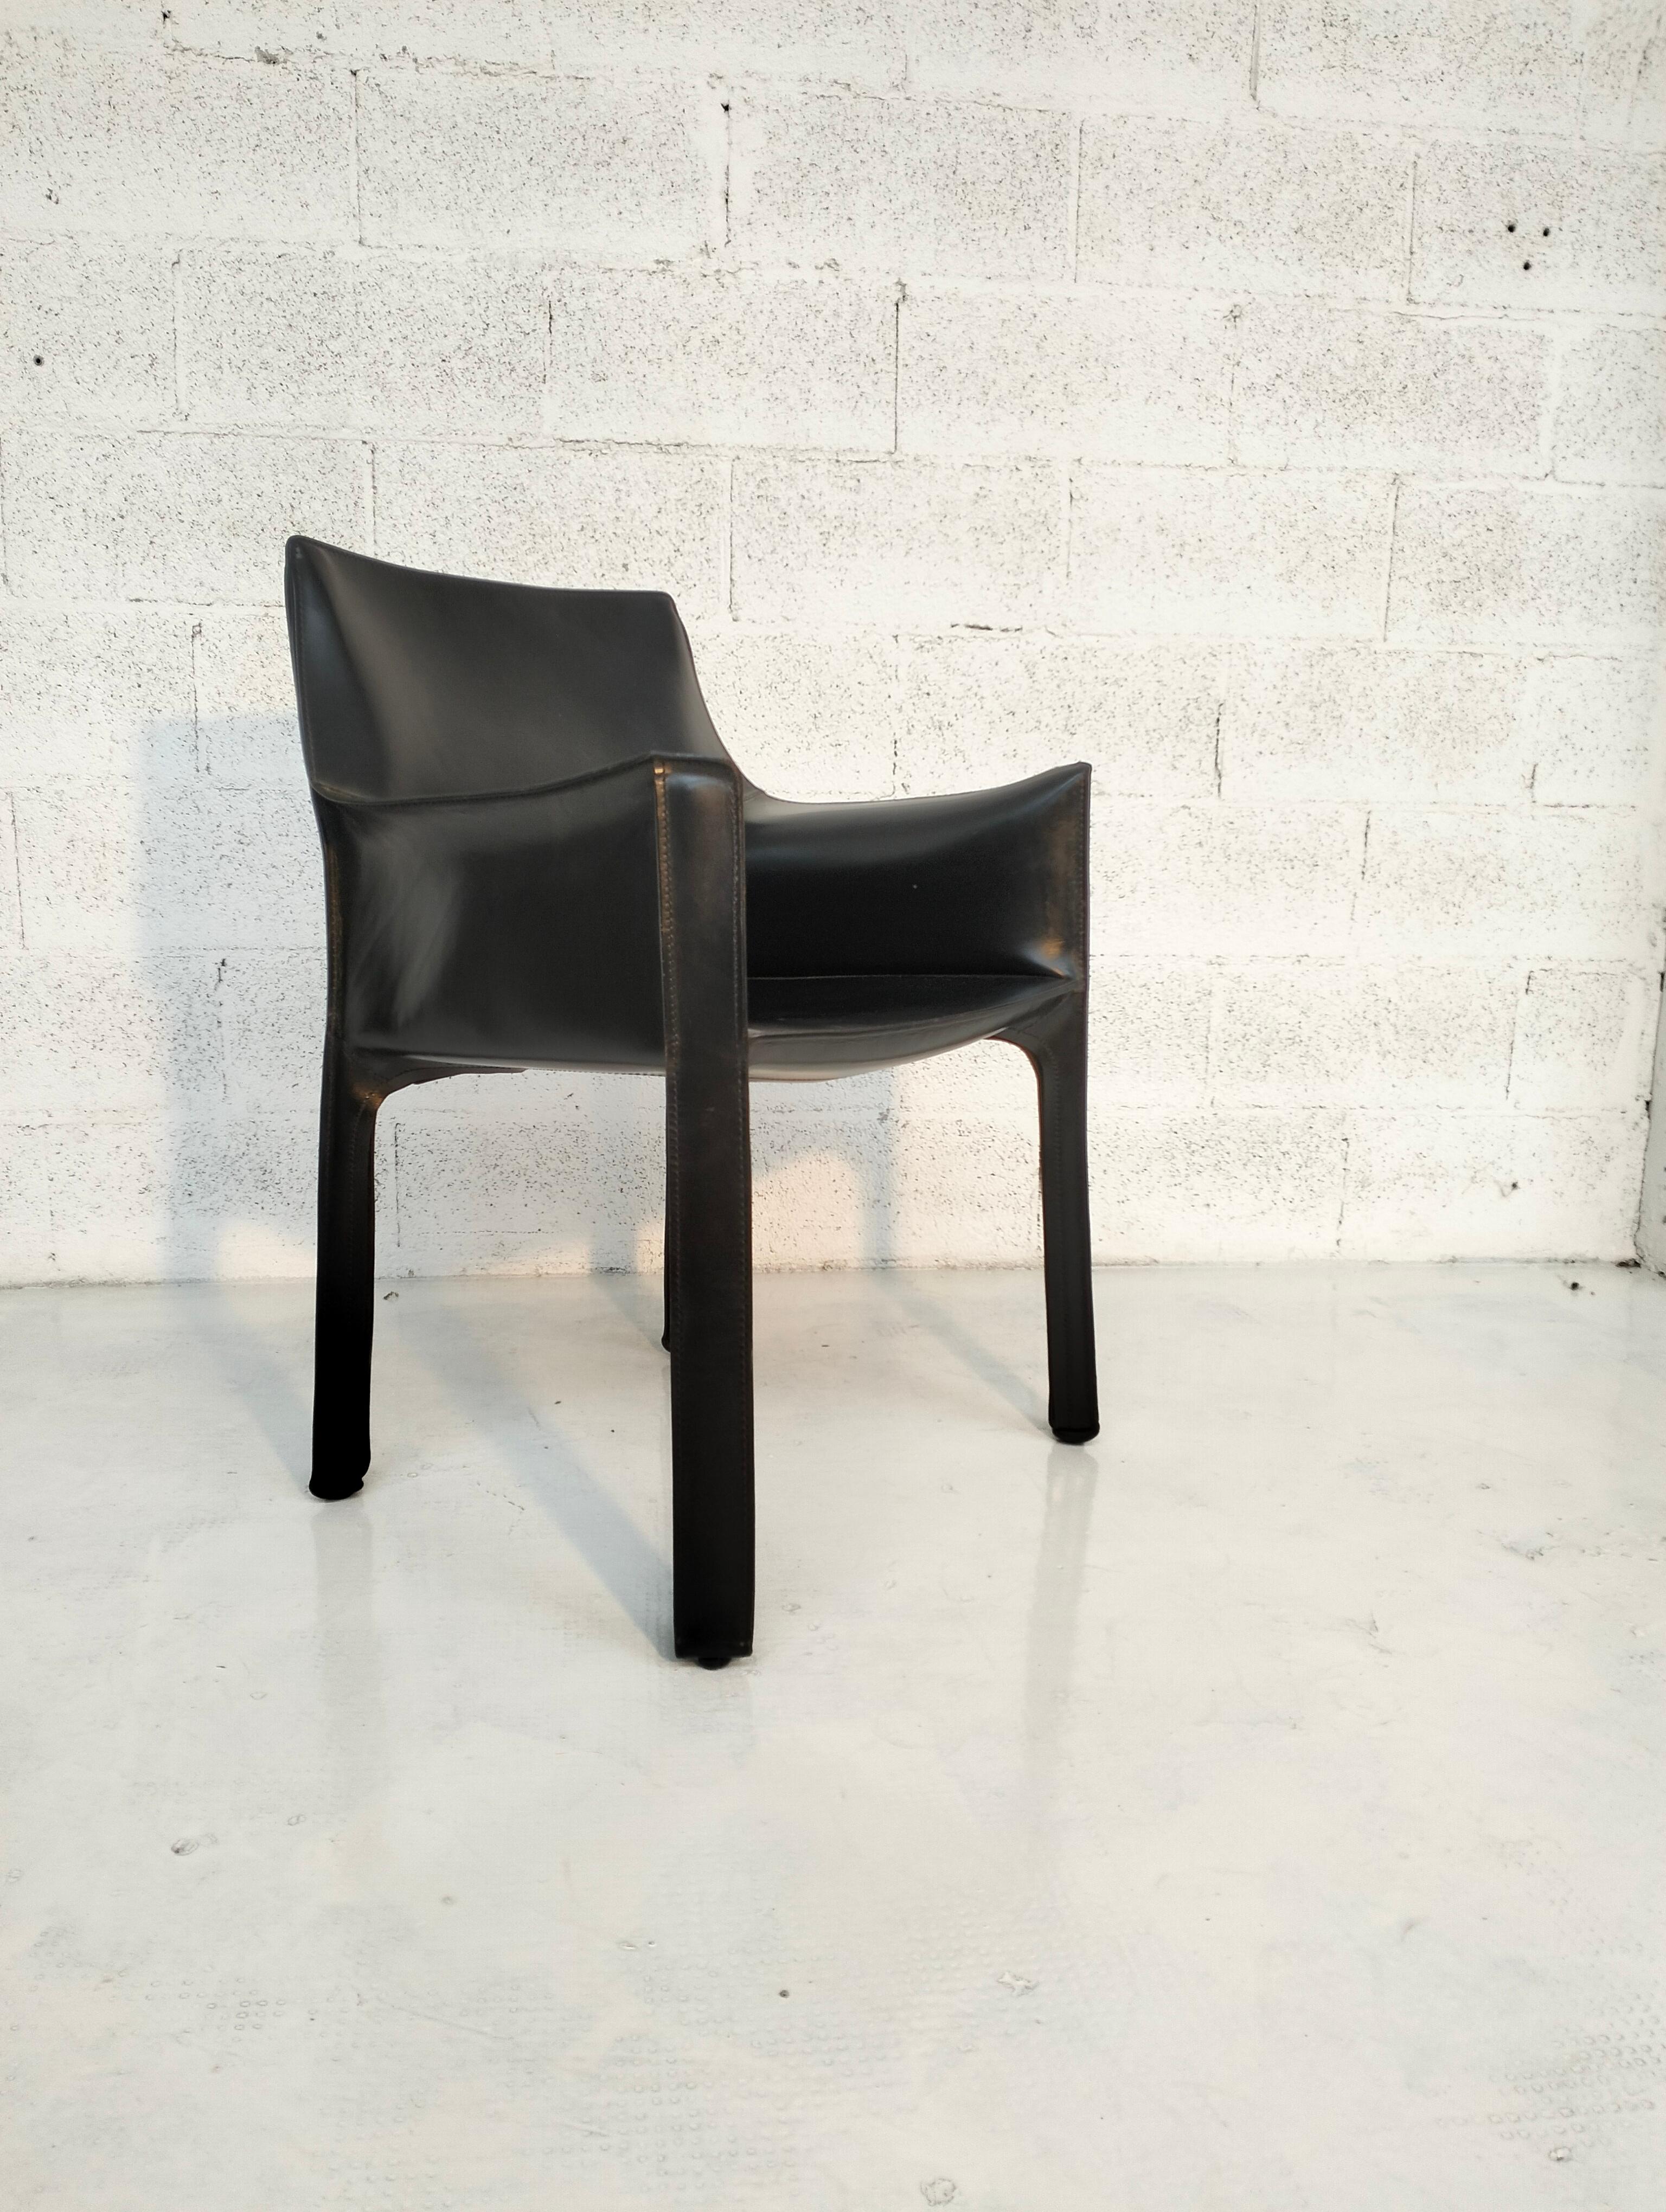 Italian Cab 413 black leather armchair by Mario Bellini for Cassina, Italy, 70's